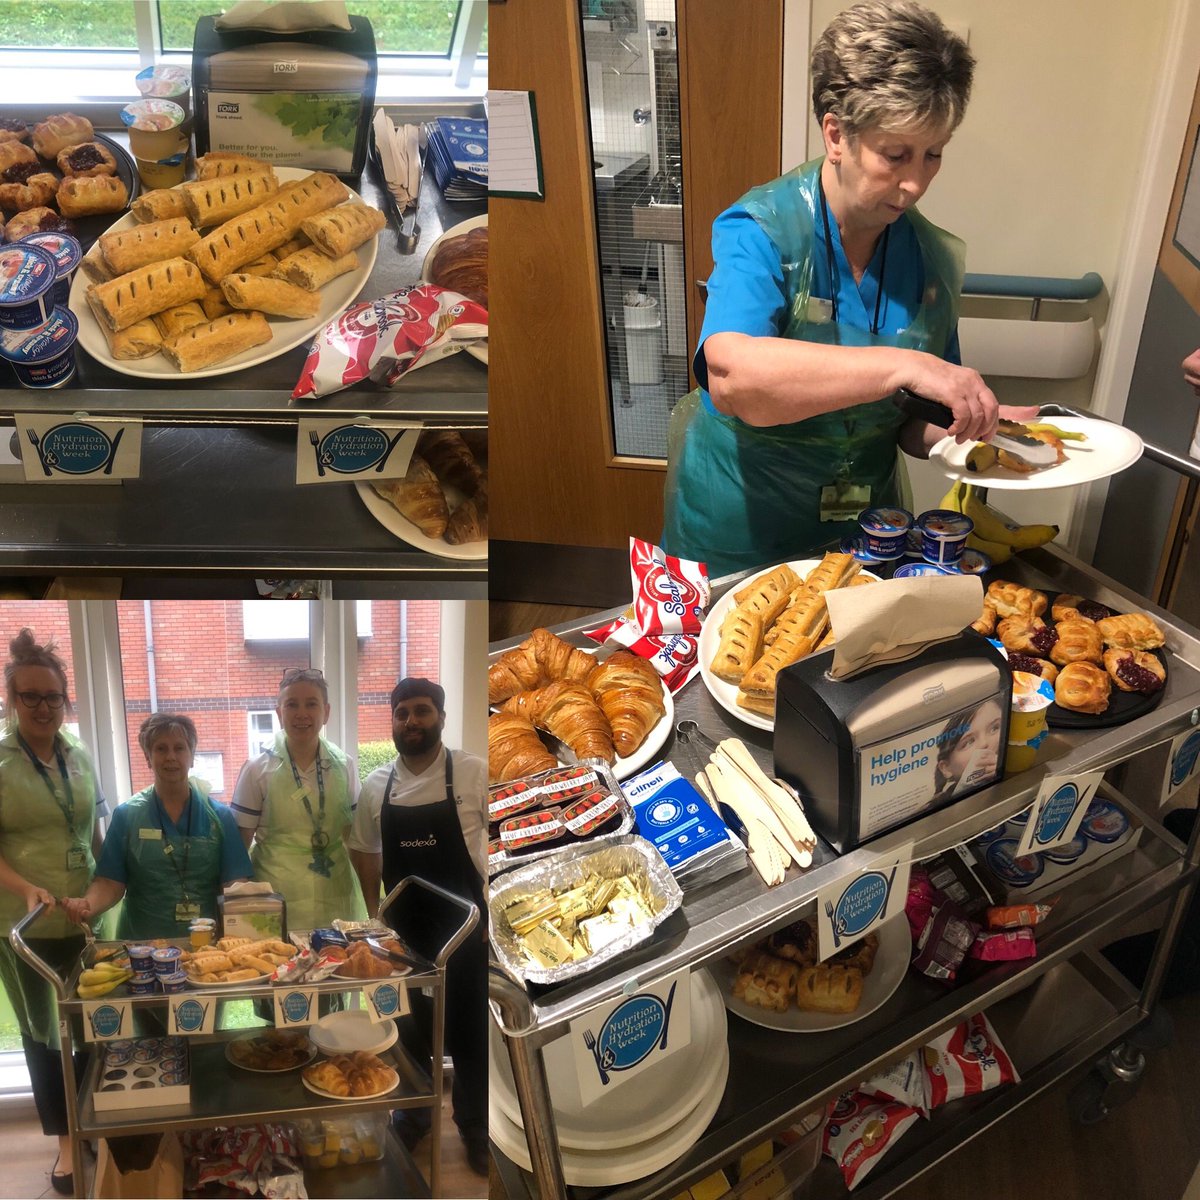 Happy snacky Tuesday everyone and happy nutrition and hydration week. Thank you to everyone who has contributed. What a great team on Pearce ward helping patients getting extra snacks! @PearceWardMFT @MFT_CSSAHPs @bda_cf #NutritionAndHydrationWeek